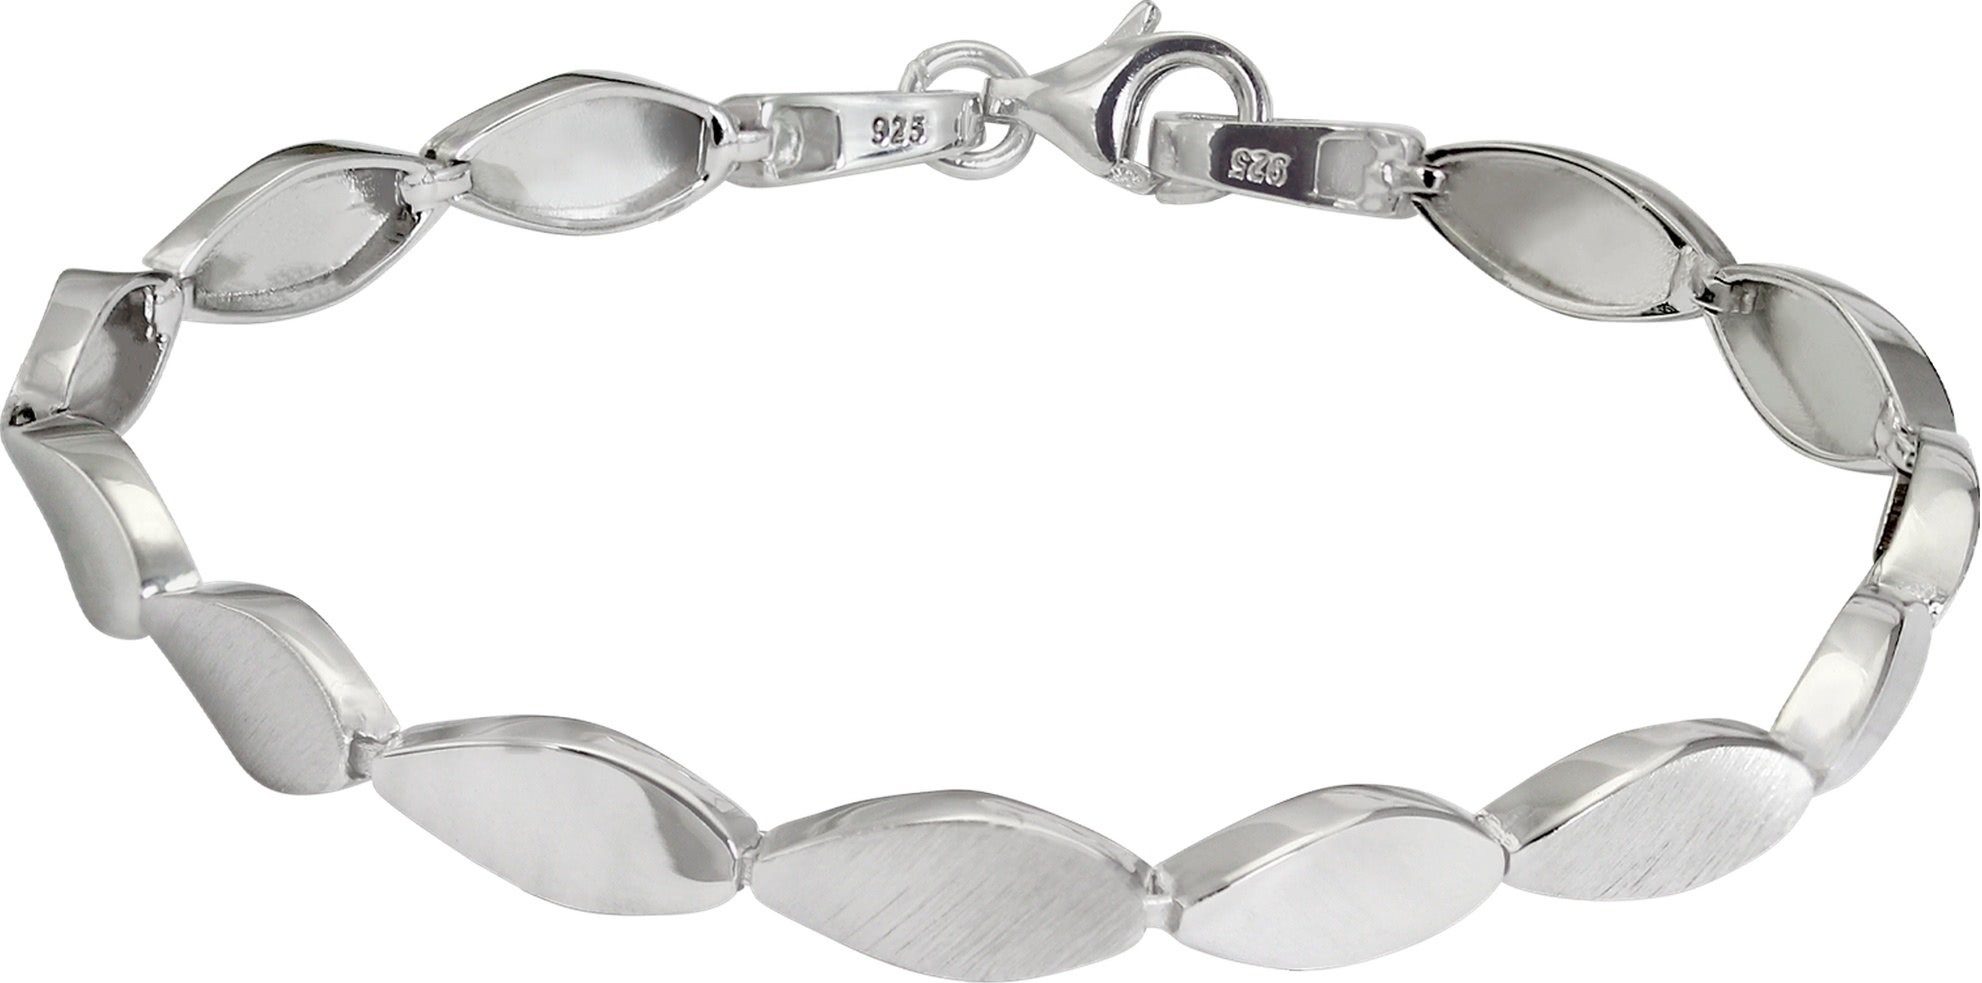 SilberDream Silberarmband SilberDream Armband Tropfen 925 Silber (Armband), Damen  Armband (Tropfen) ca. 19cm, 925 Sterling Silber, Farbe: silber